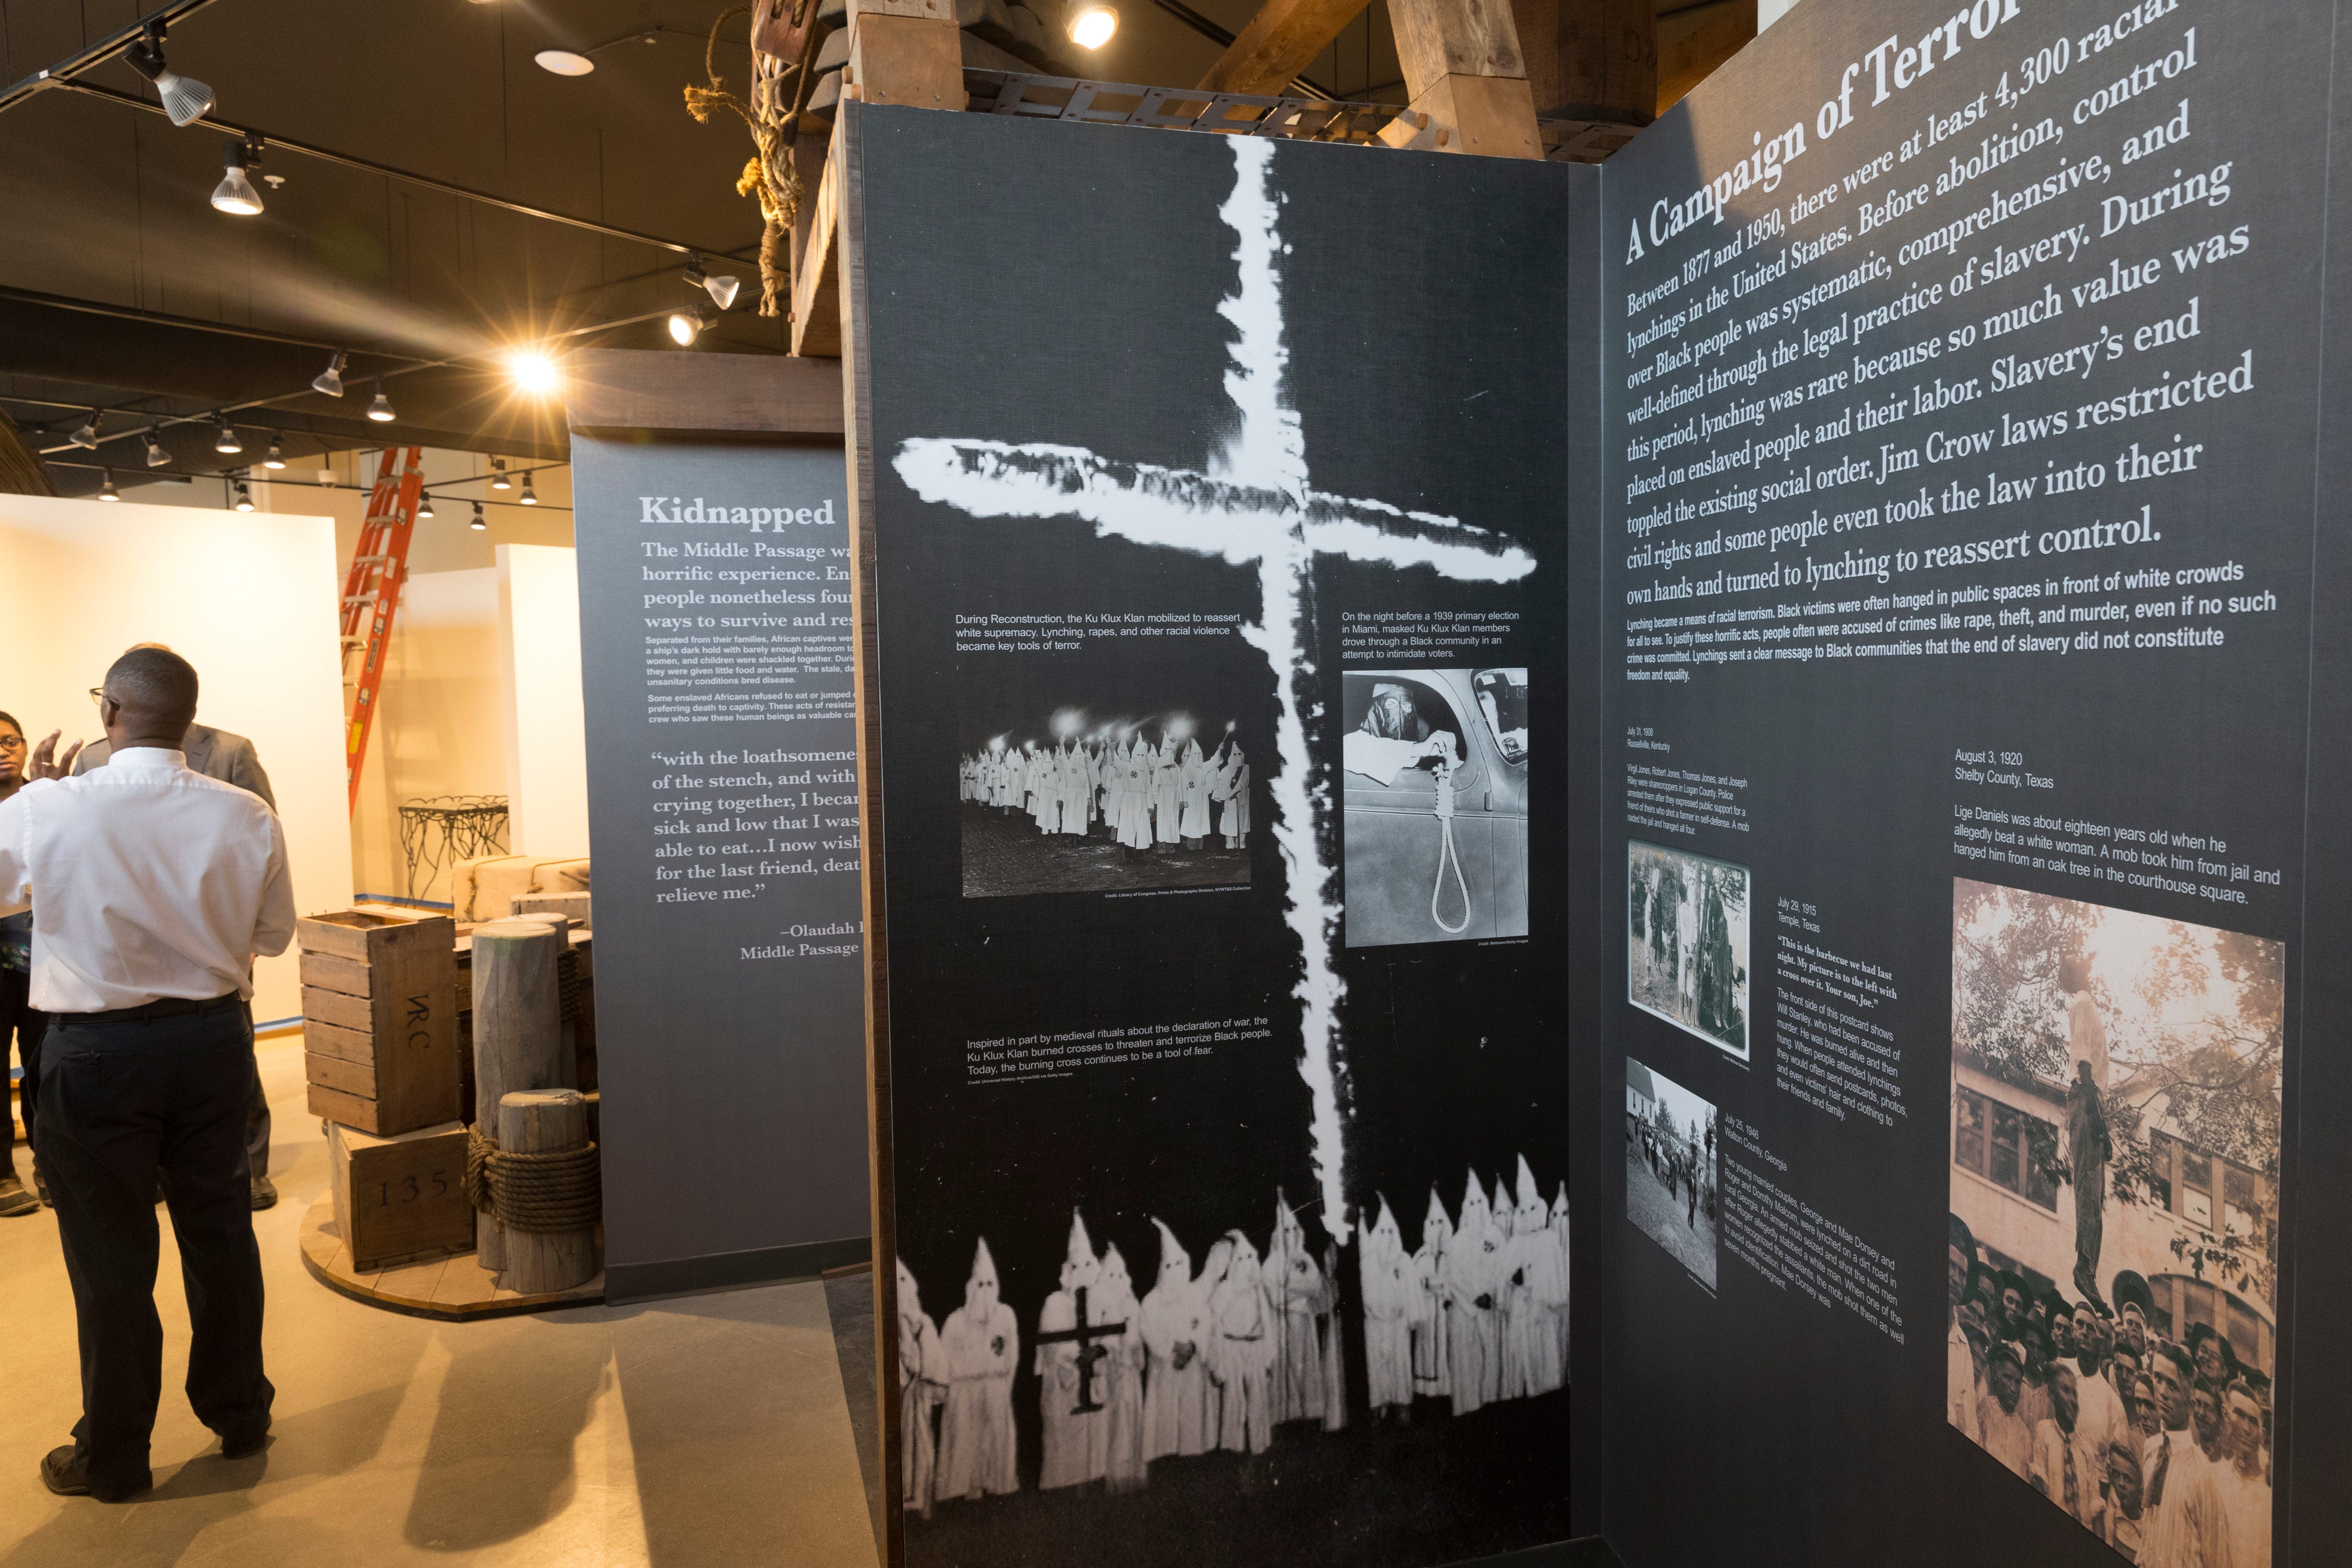 About America’s Black Holocaust Museum